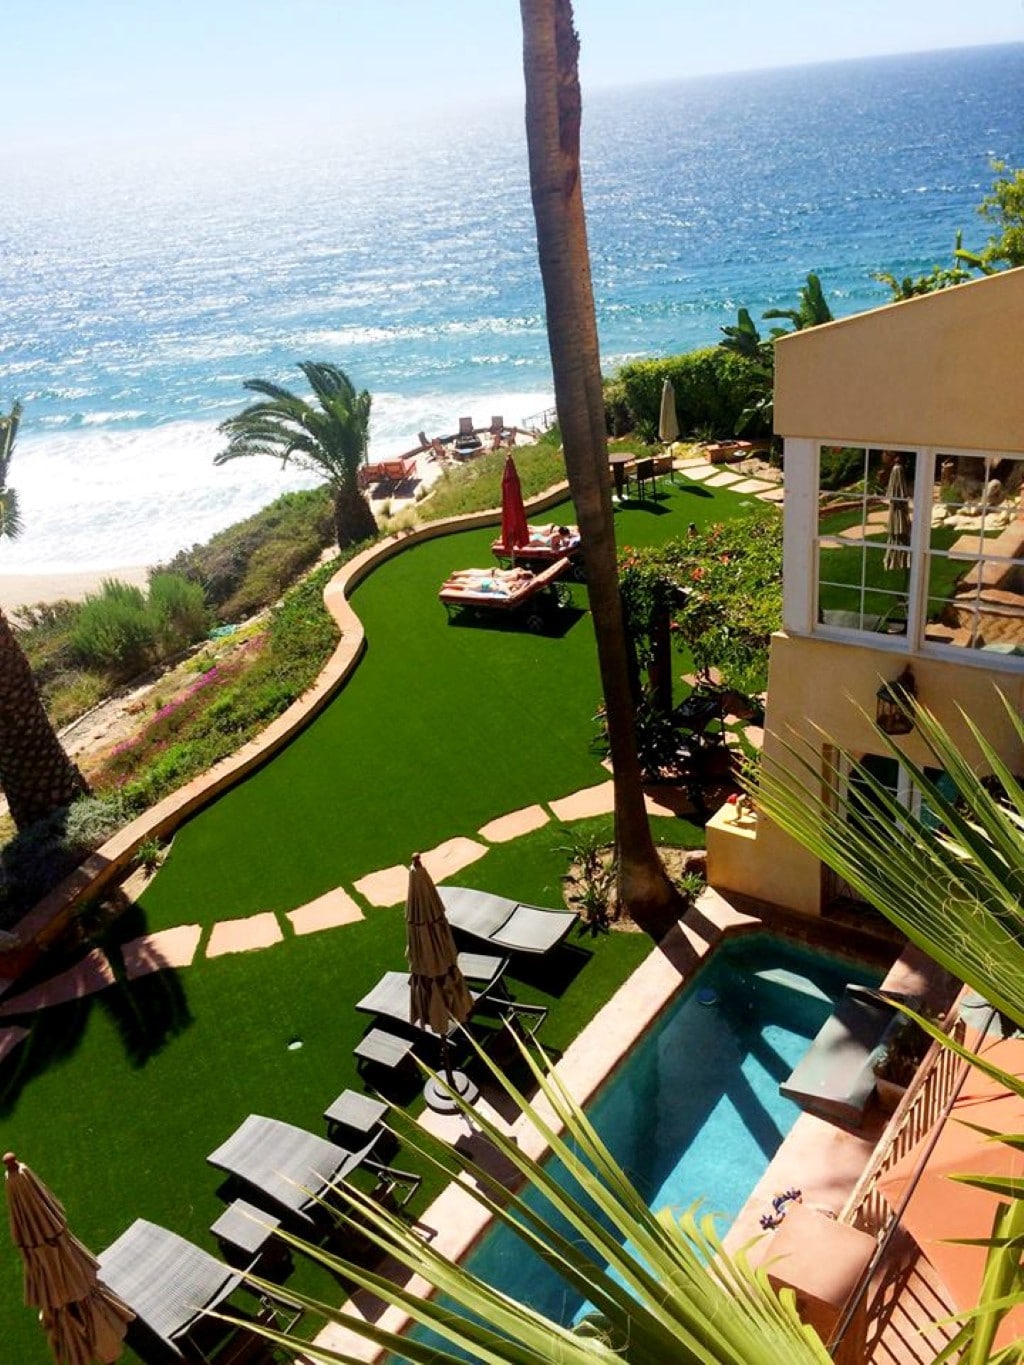 Oceanfront Malibu Estate with 2 Guesthouses, Tennis